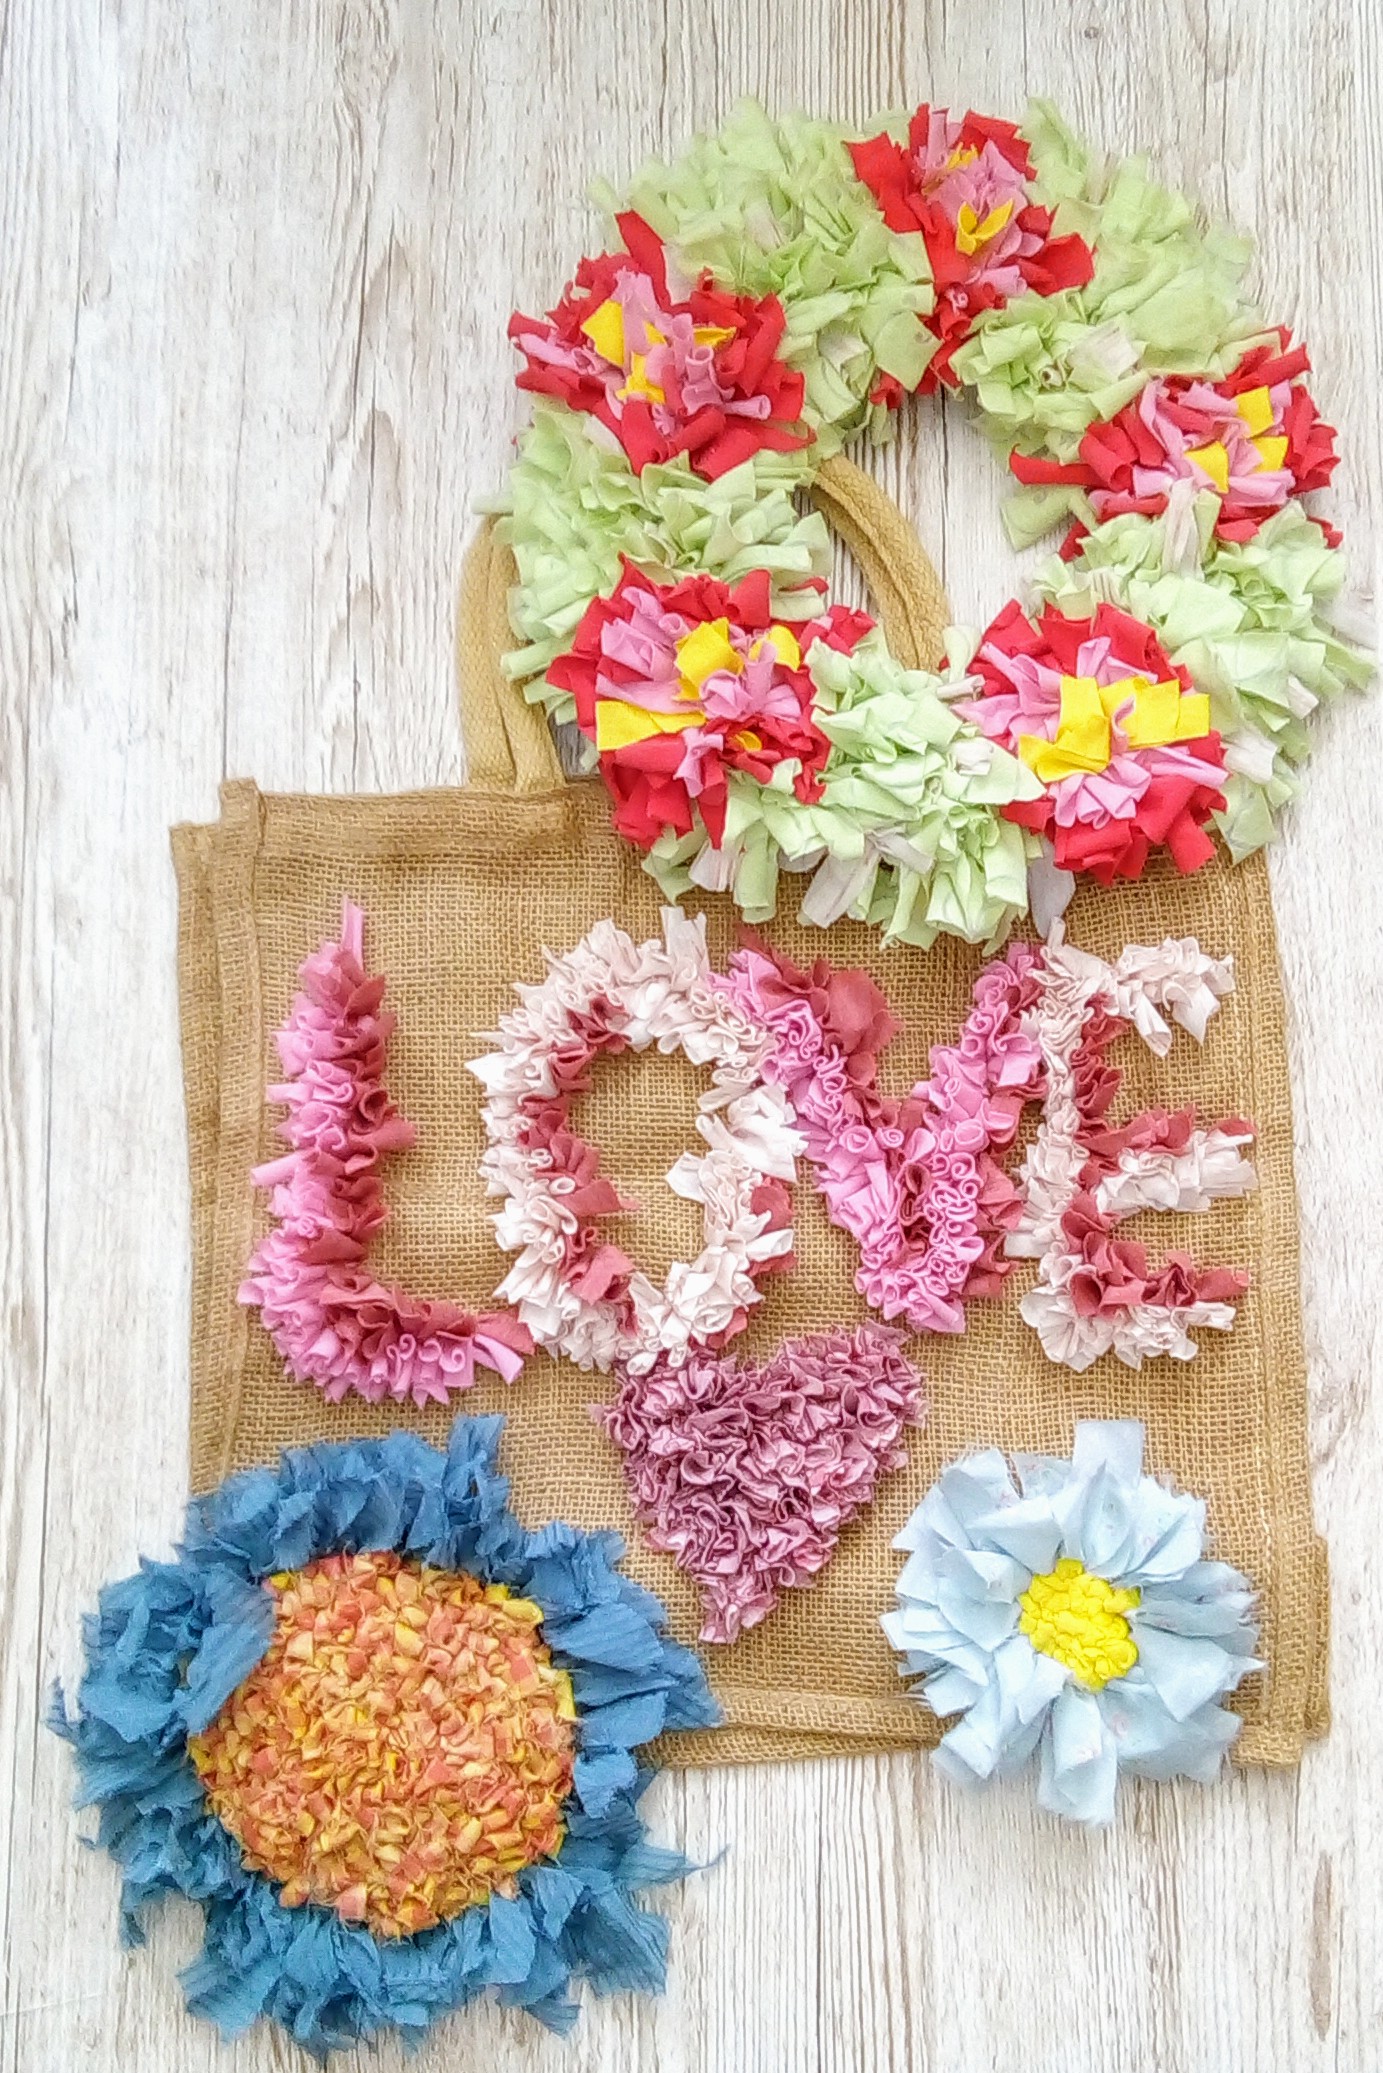 Love rag rug bag and spring wreath and flowers